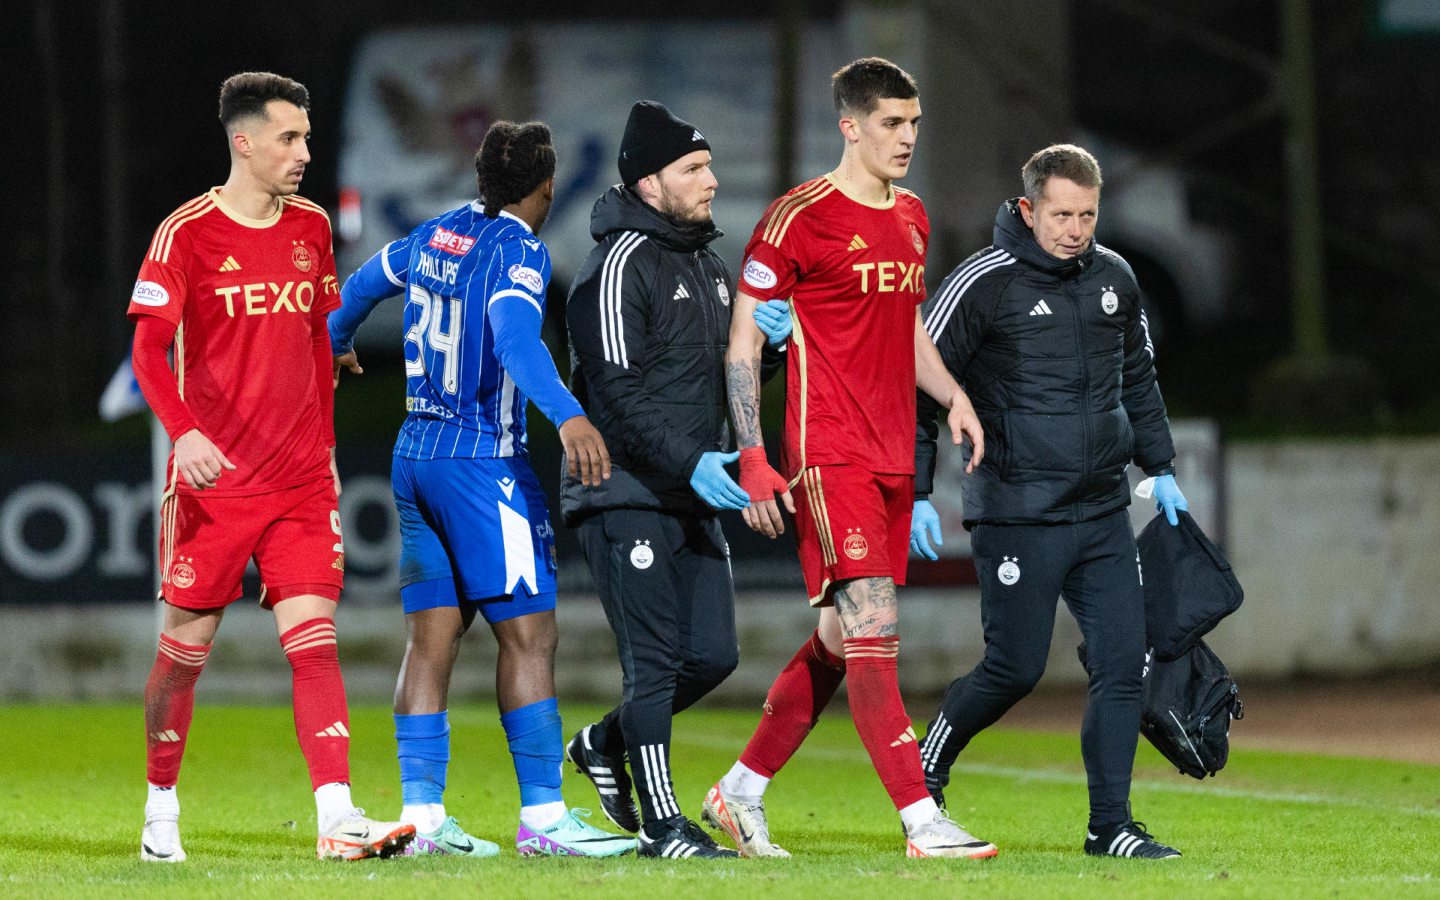 Aberdeen's Slobodan Rubezic (C) goes off injured in the 1-1 draw at St Johnstone. Image: SNS 